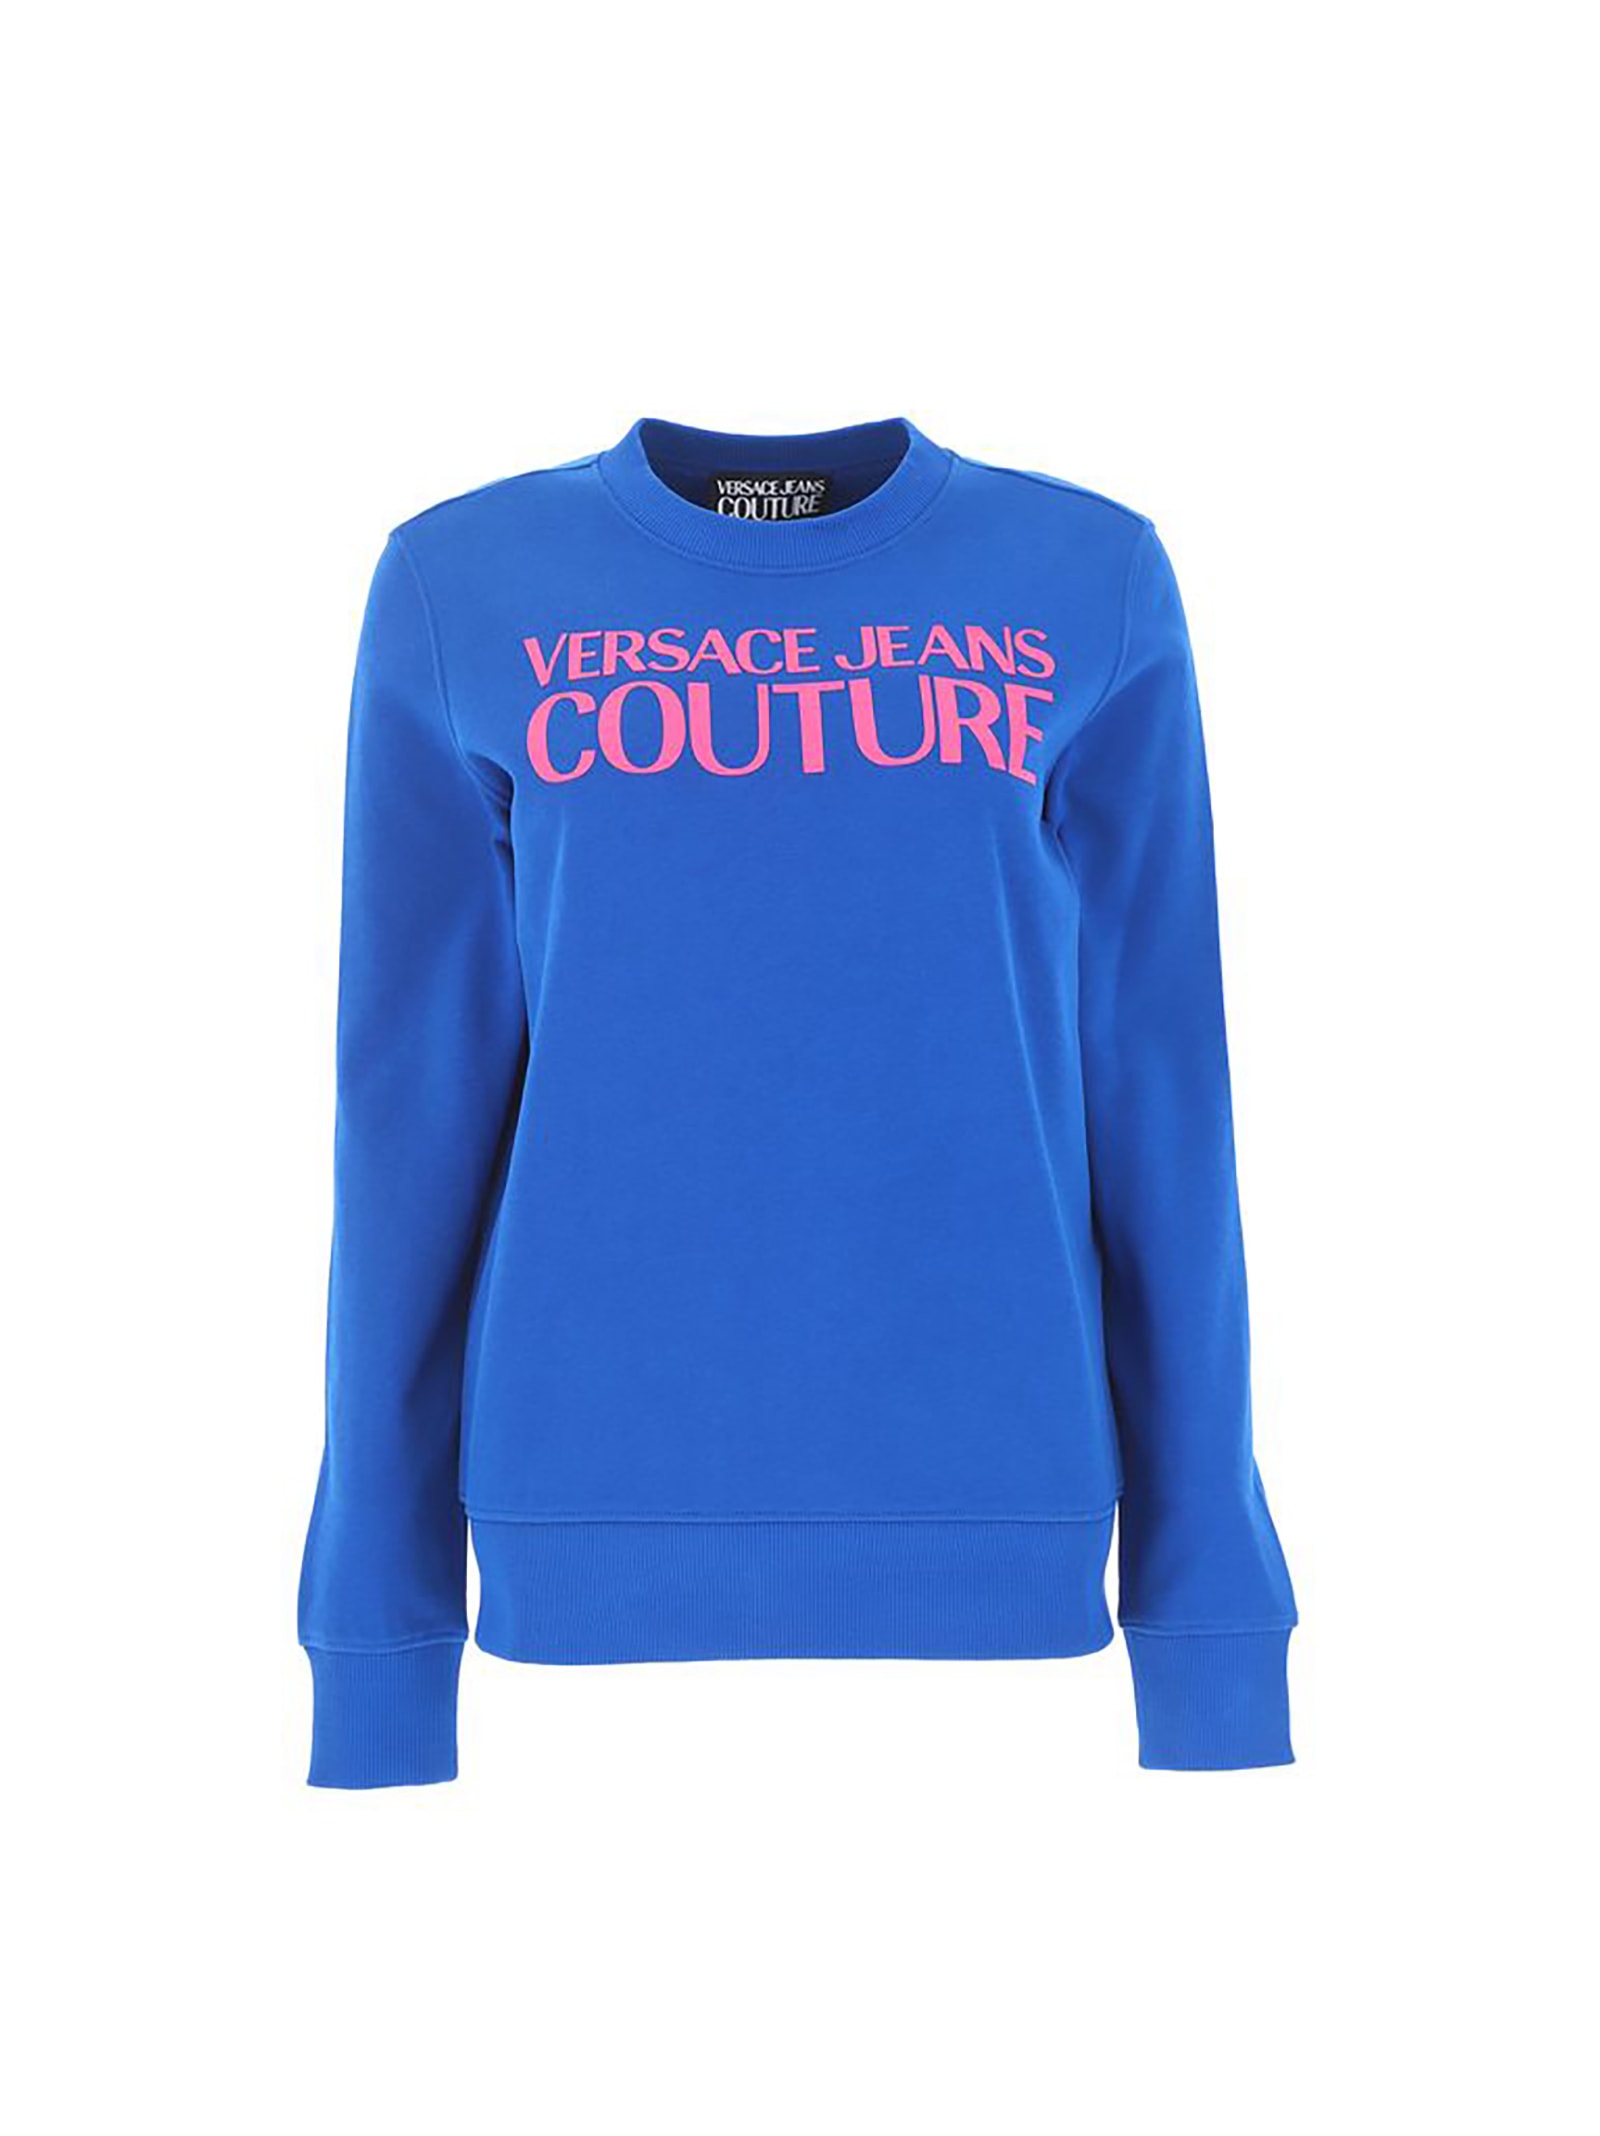 Versace Jeans Couture Organic Cotton Sweatshirt with rubber logo